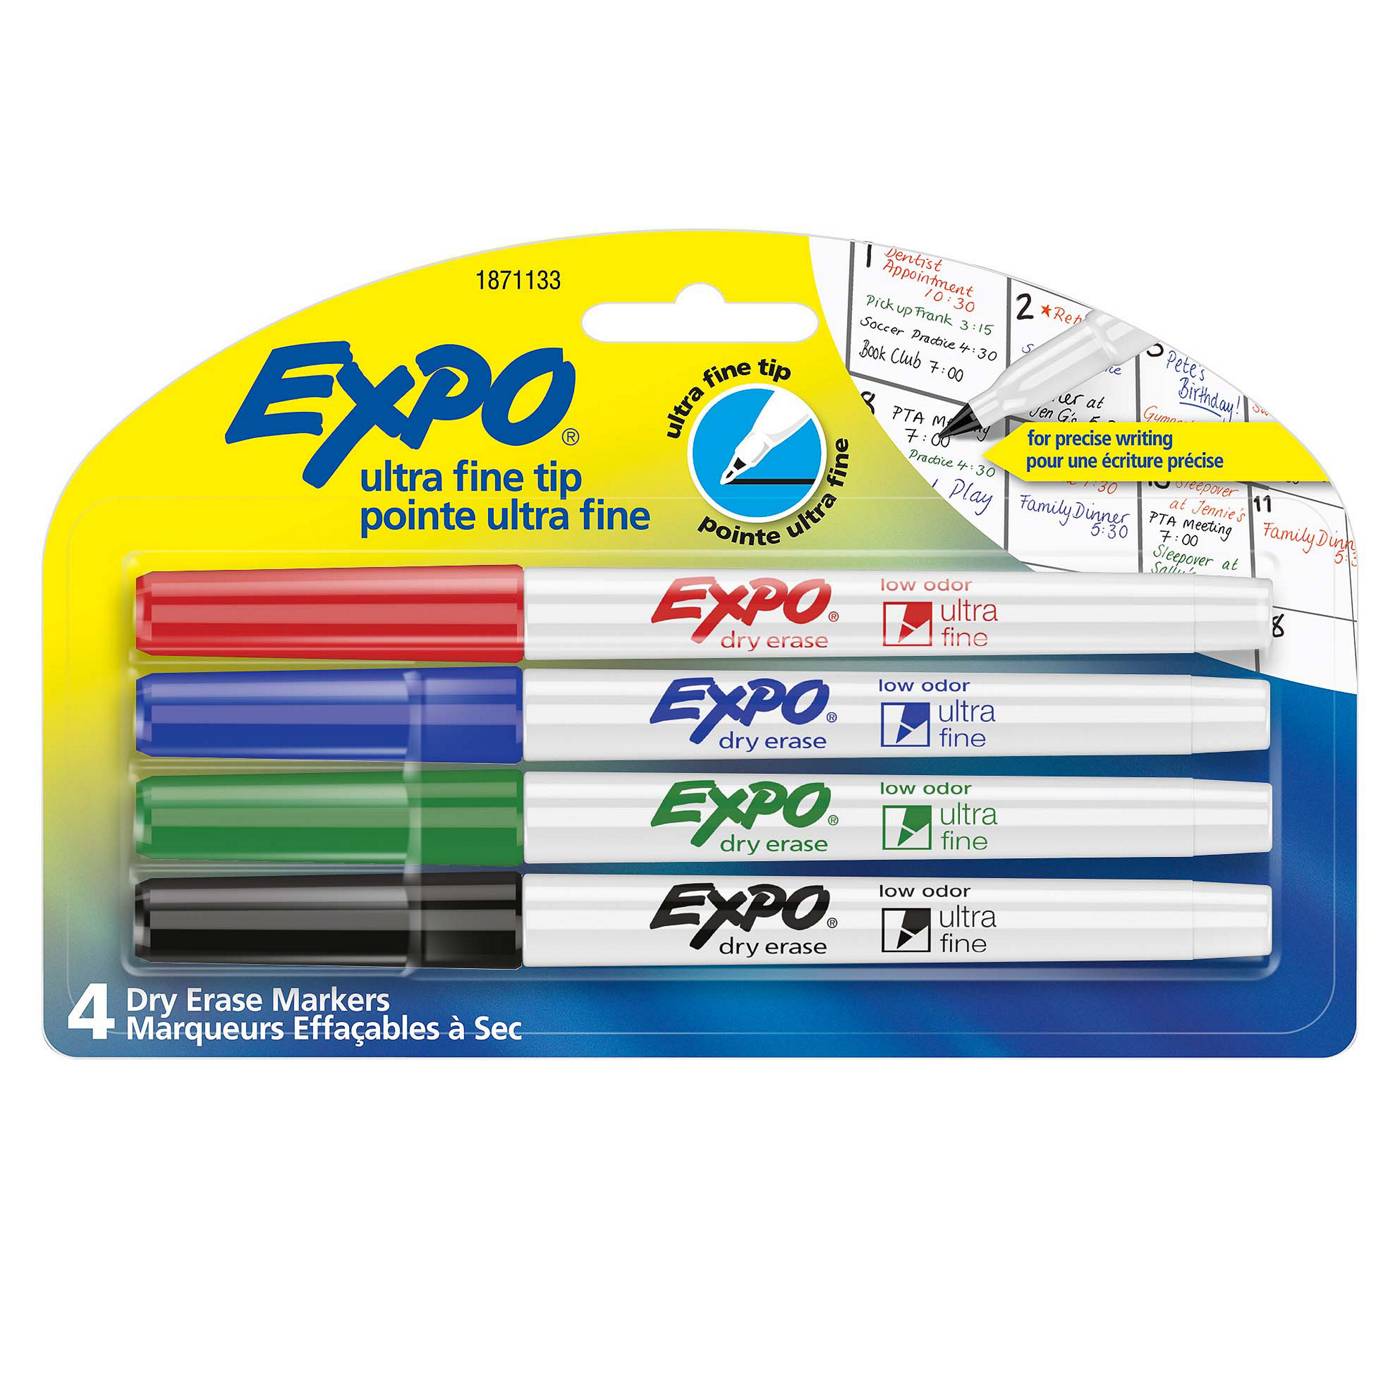 EXPO Ultra Fine Tip Dry Erase Markers - Assorted Ink; image 1 of 3